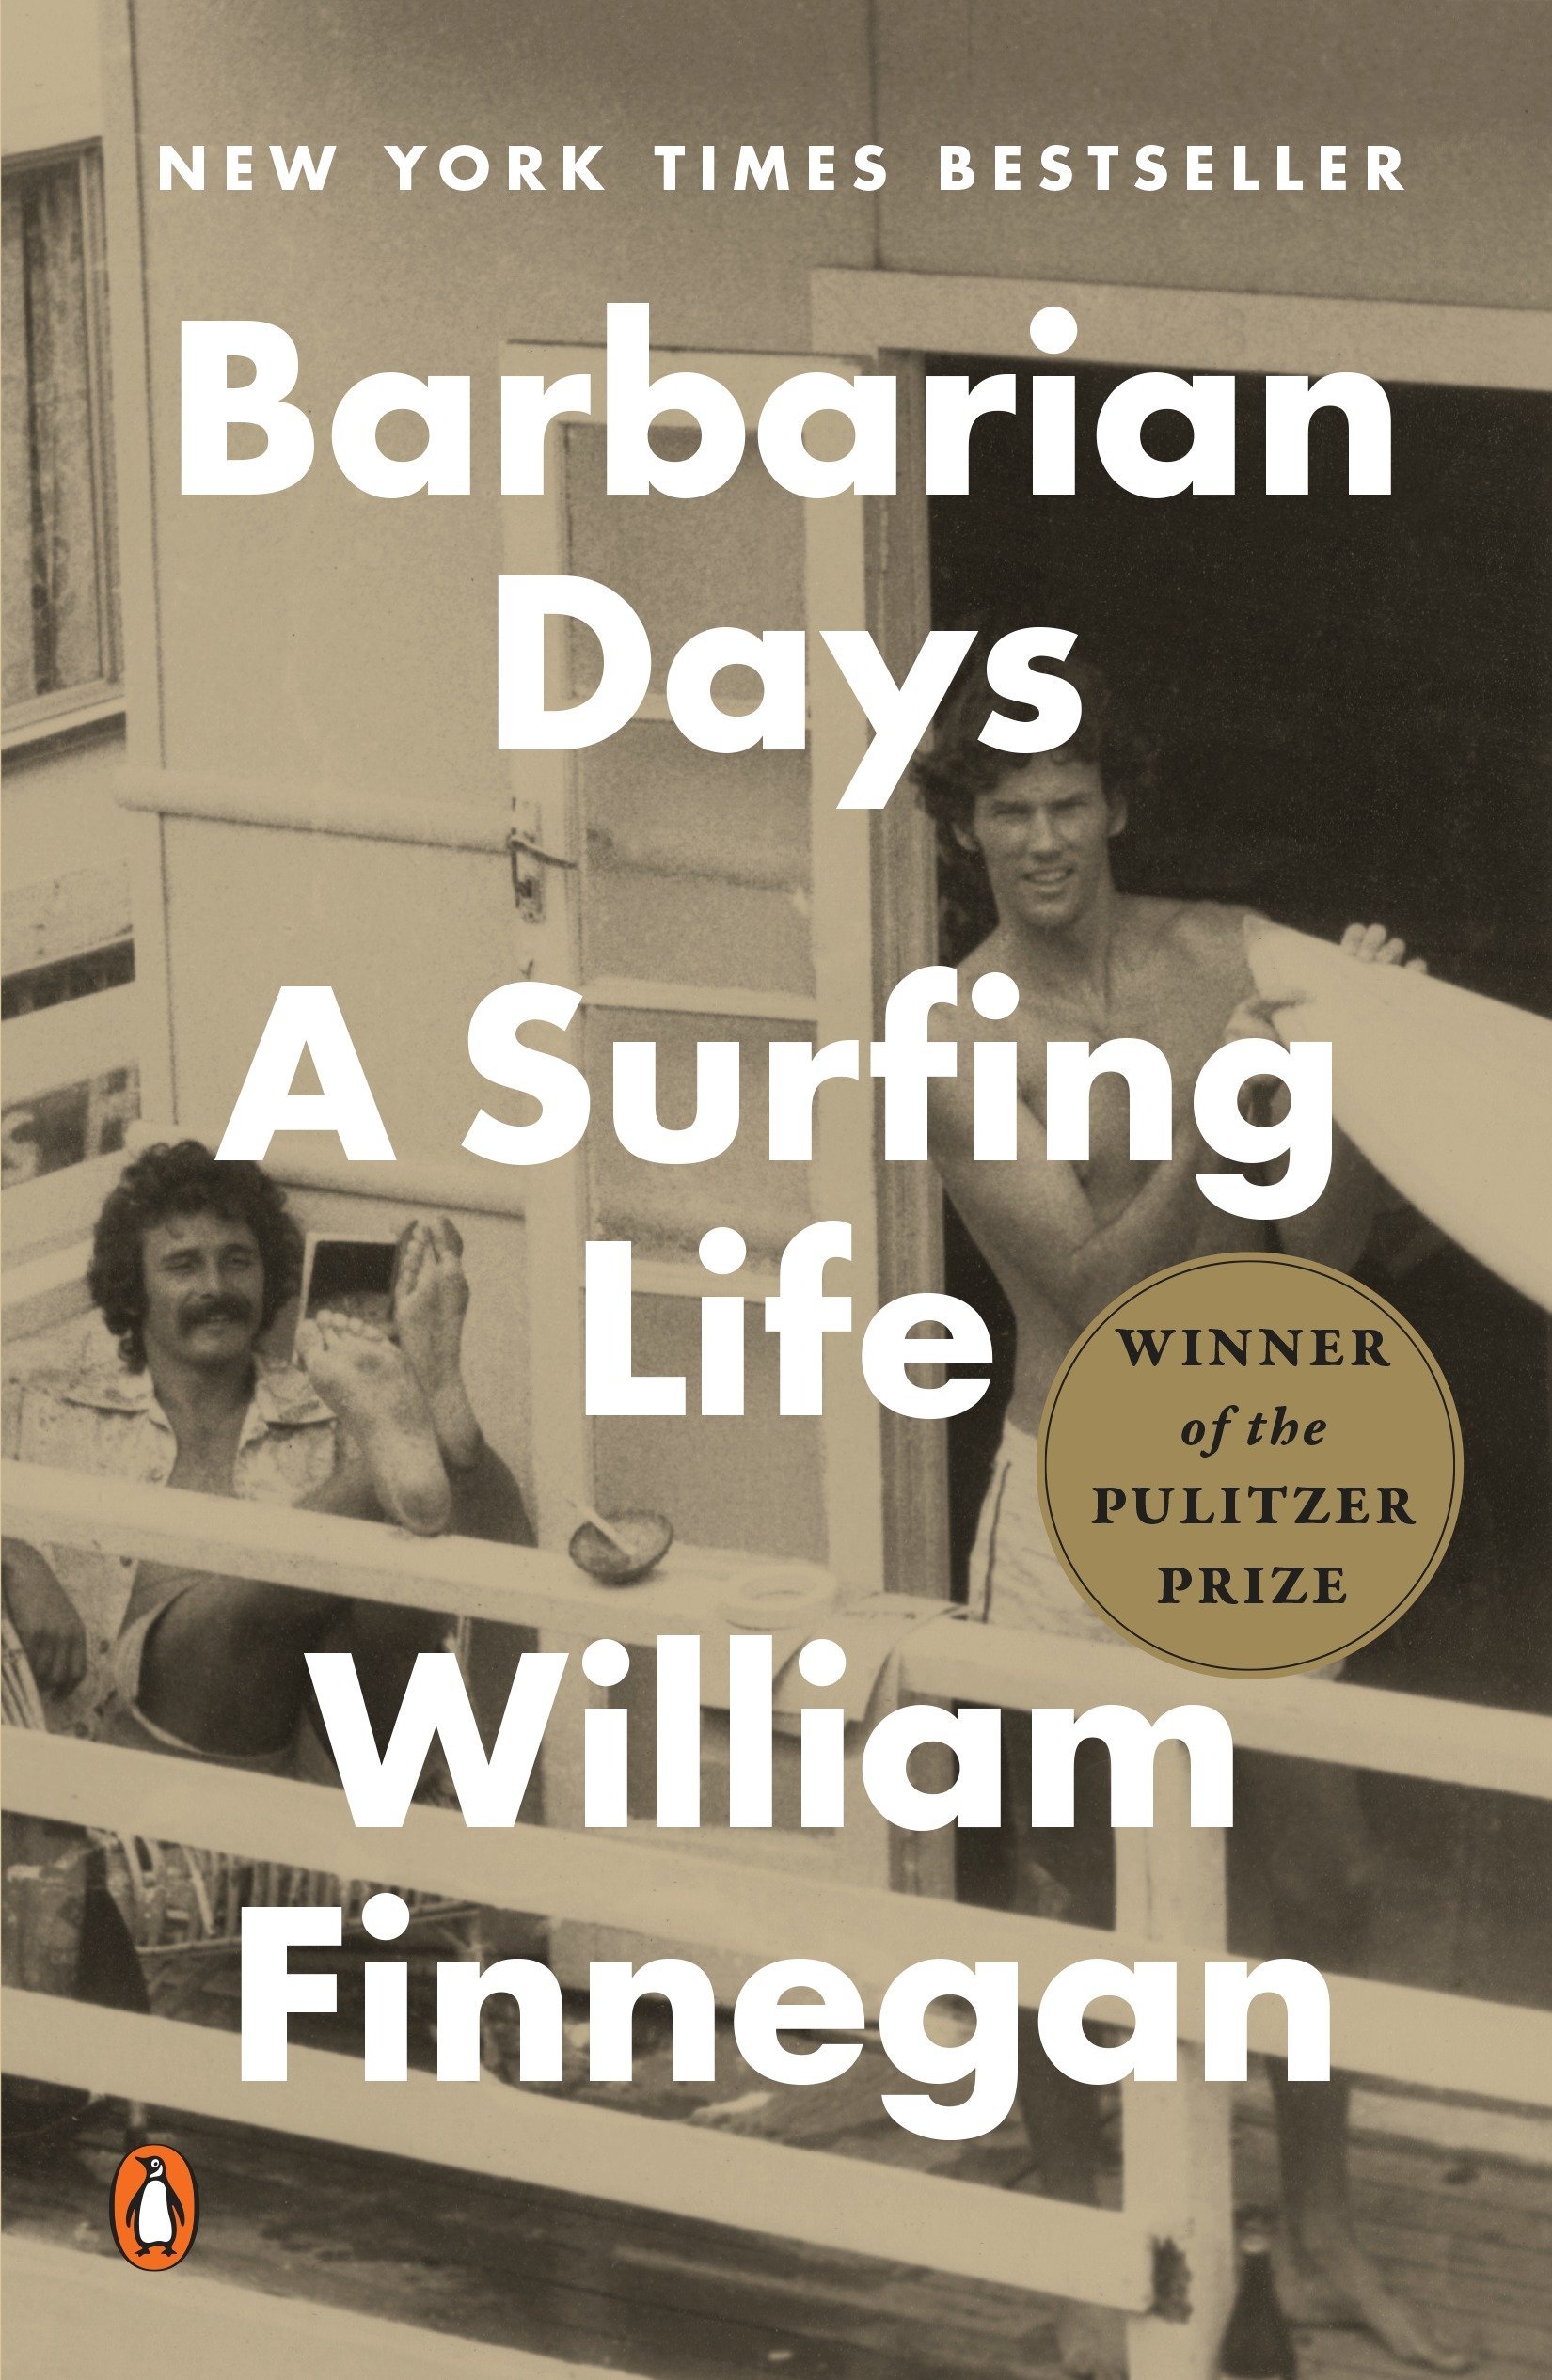 “Barbarian Days: A Surfing Life” by William Finnegan 